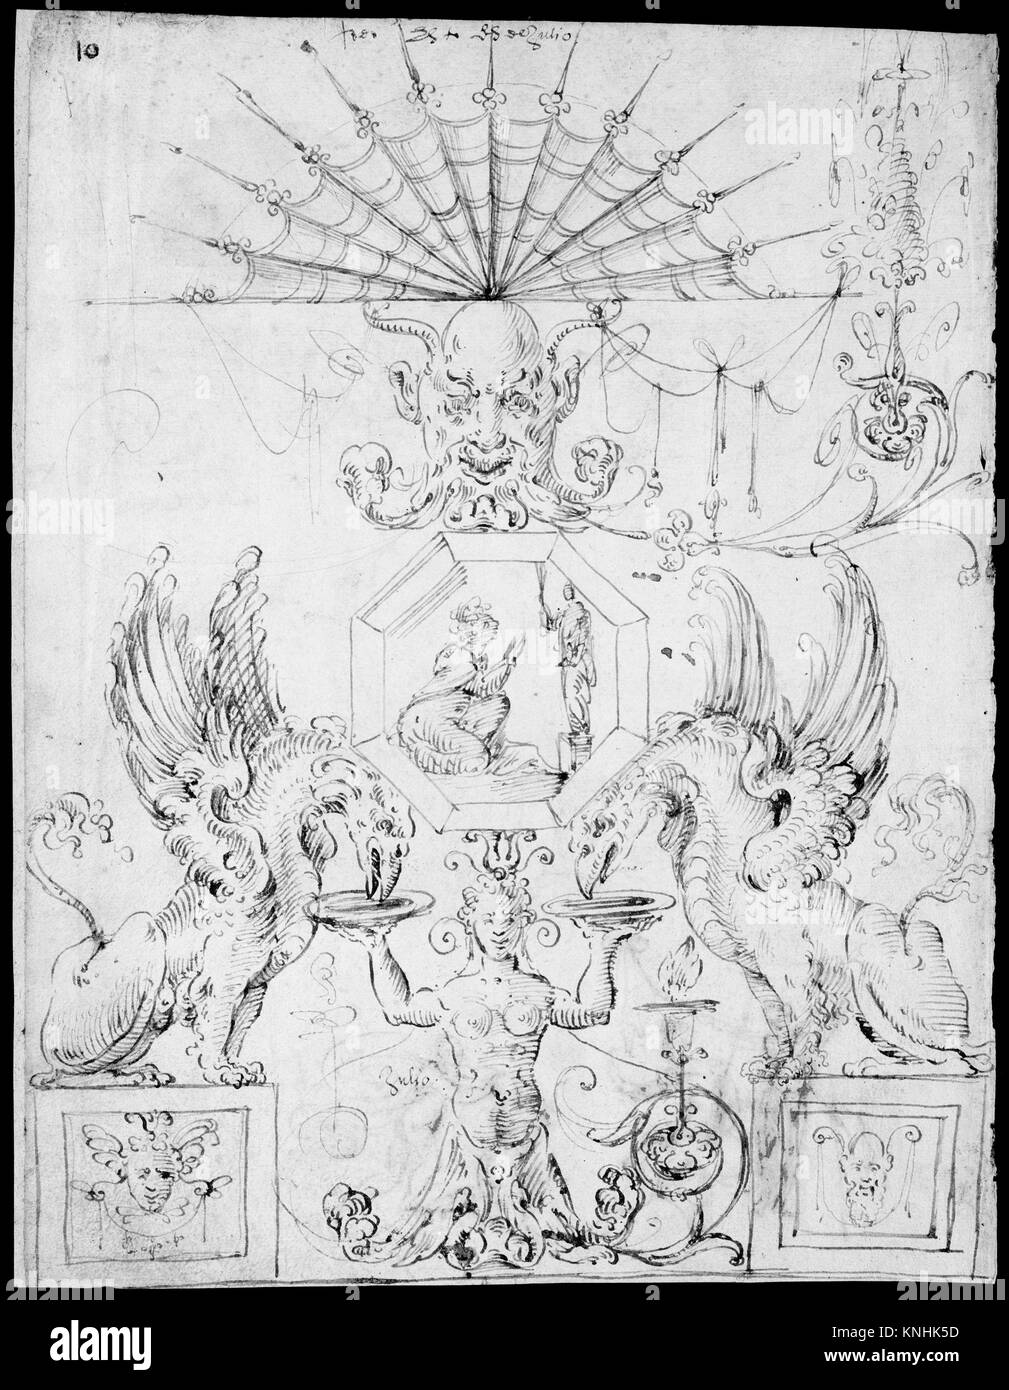 Grotesque Design with an Octagonal Panel in the Center and Two Griffins Drinking from PLates held up by a Hybrid Creature (recto); Two Turtles above a Scene with Four Figures (verso) MET MM37922 337501 Stock Photo